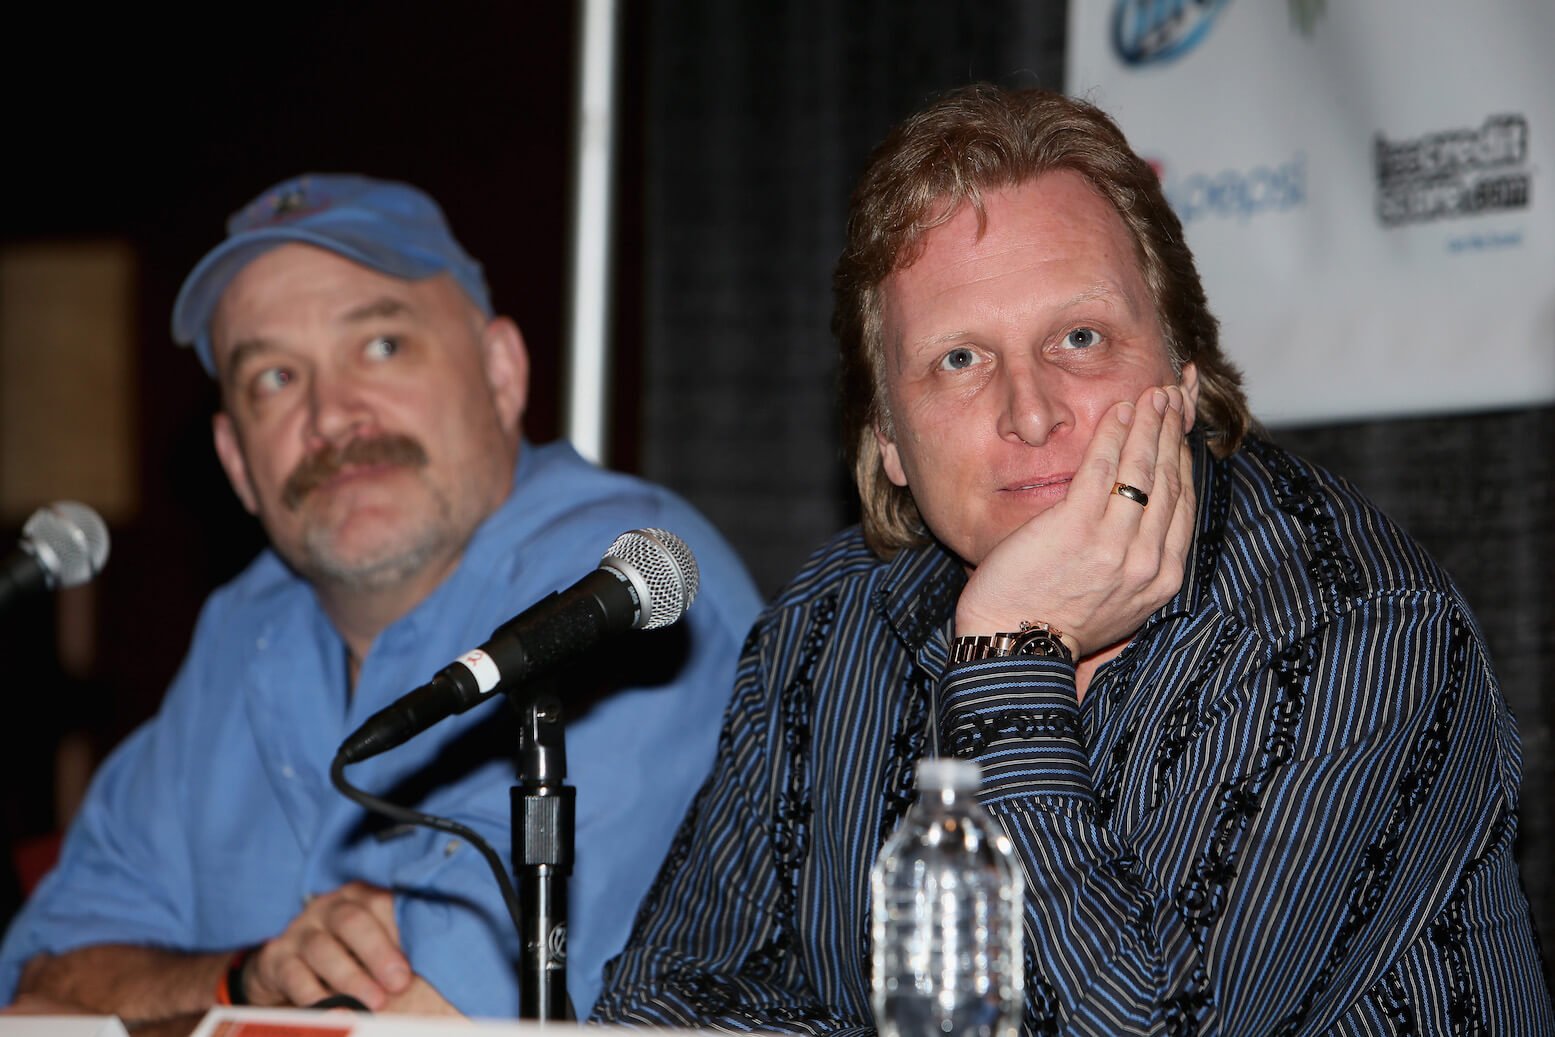 'Deadliest Catch' captains Sig Hansen and Keith Colburn sitting for an interview